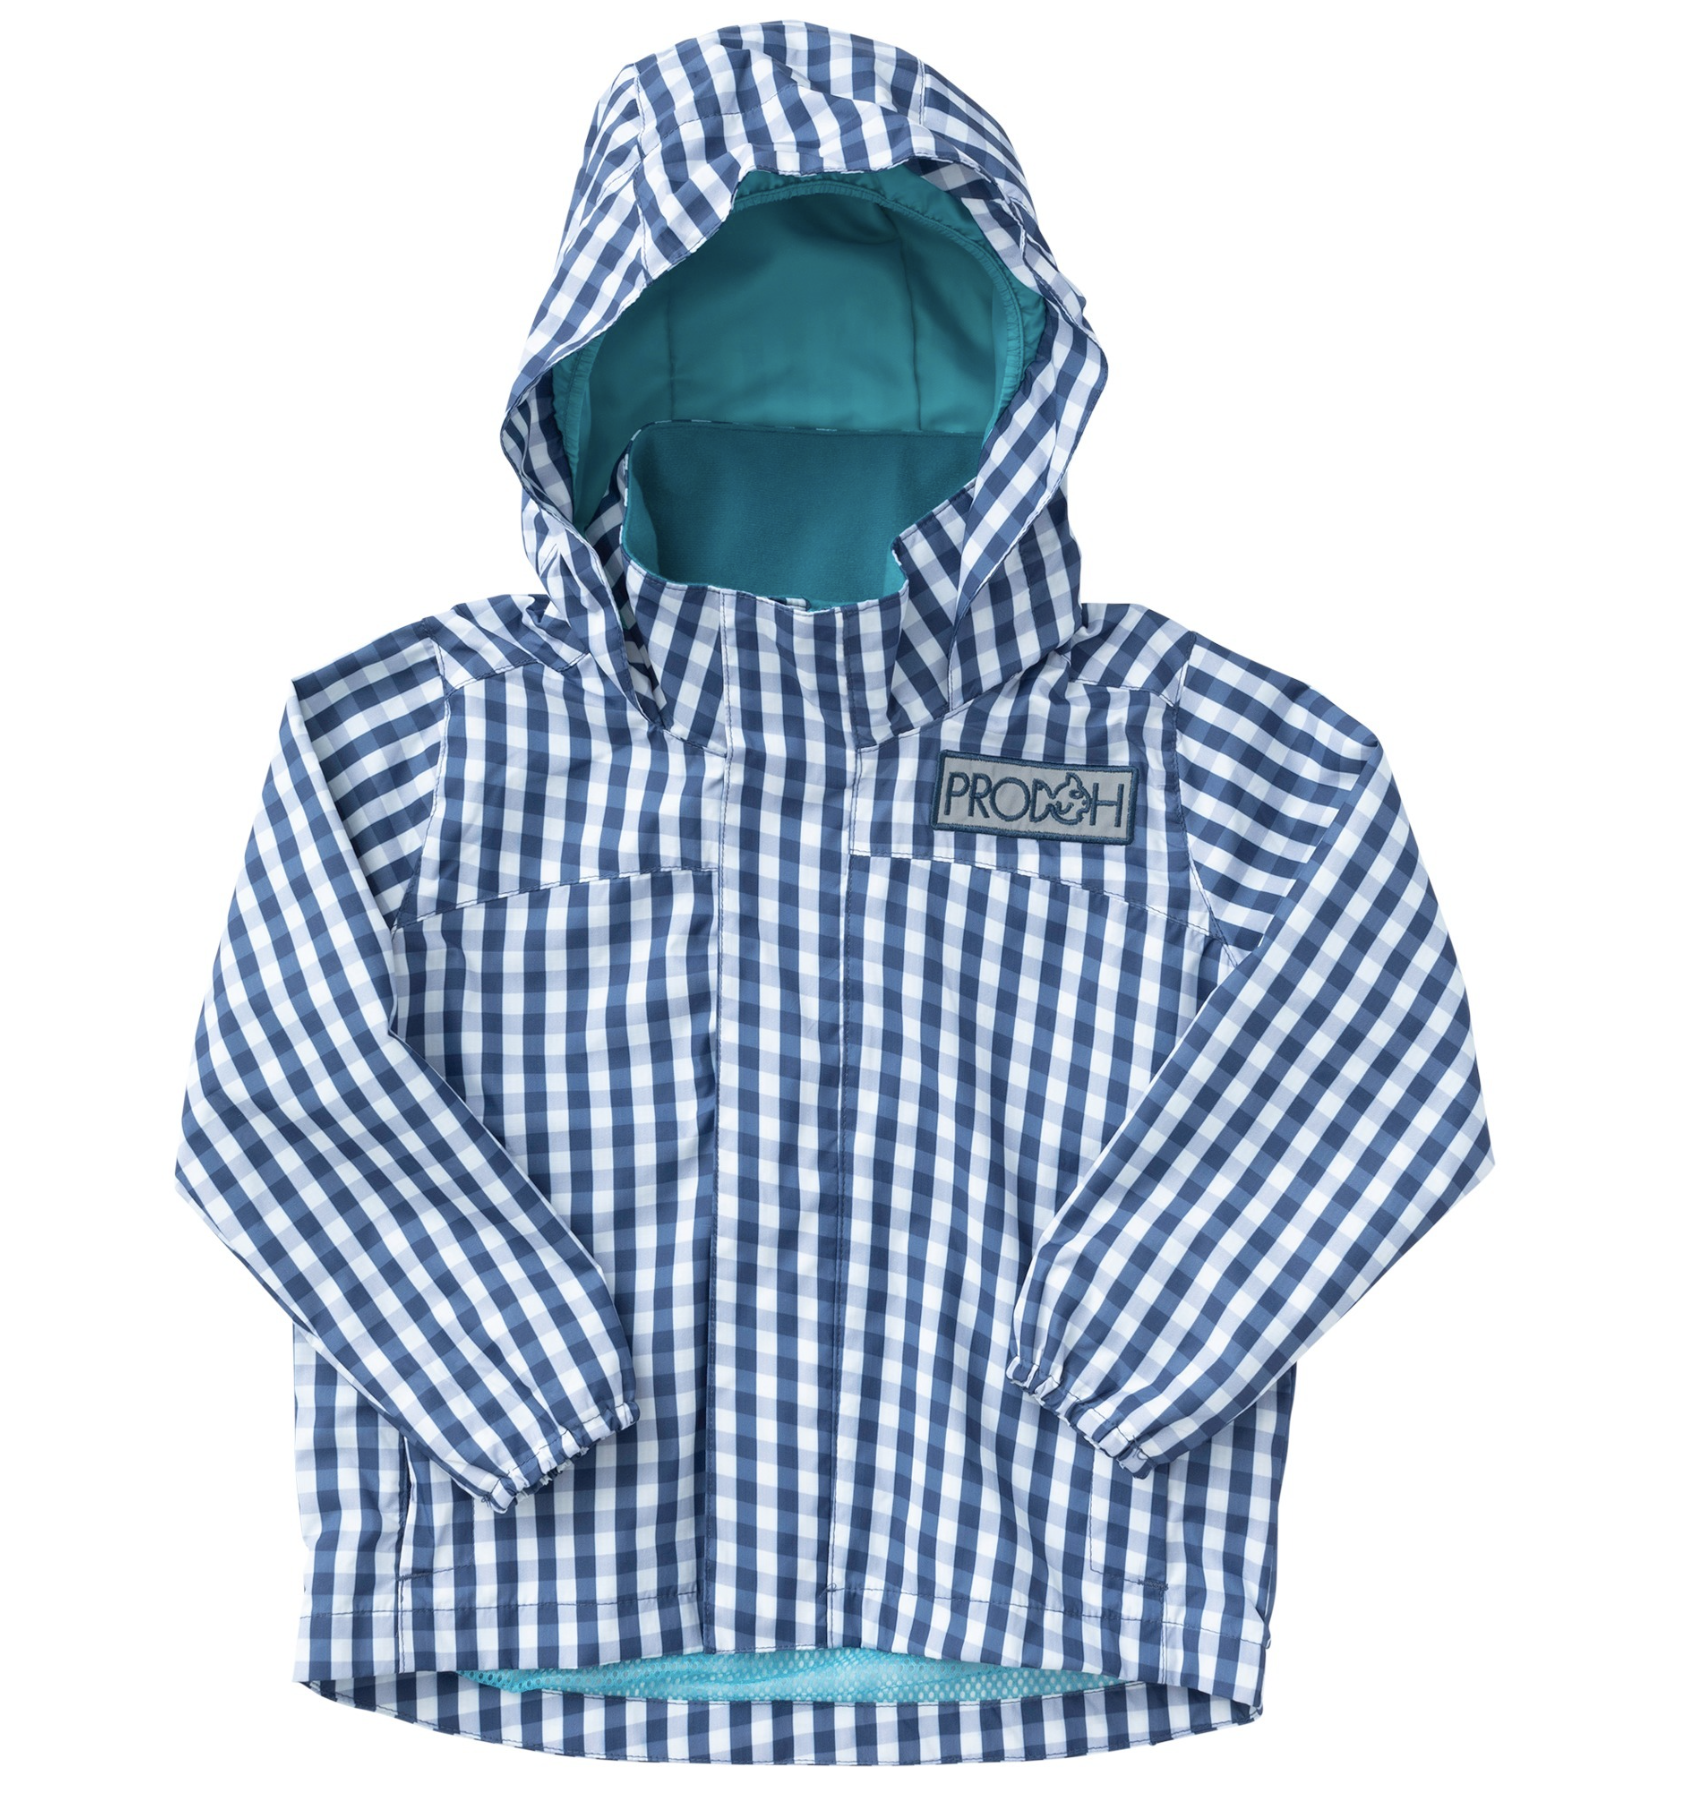 Prodoh Boys Water/Wind Reflective Jacket Blueberry Gingham - The Village  Exchange